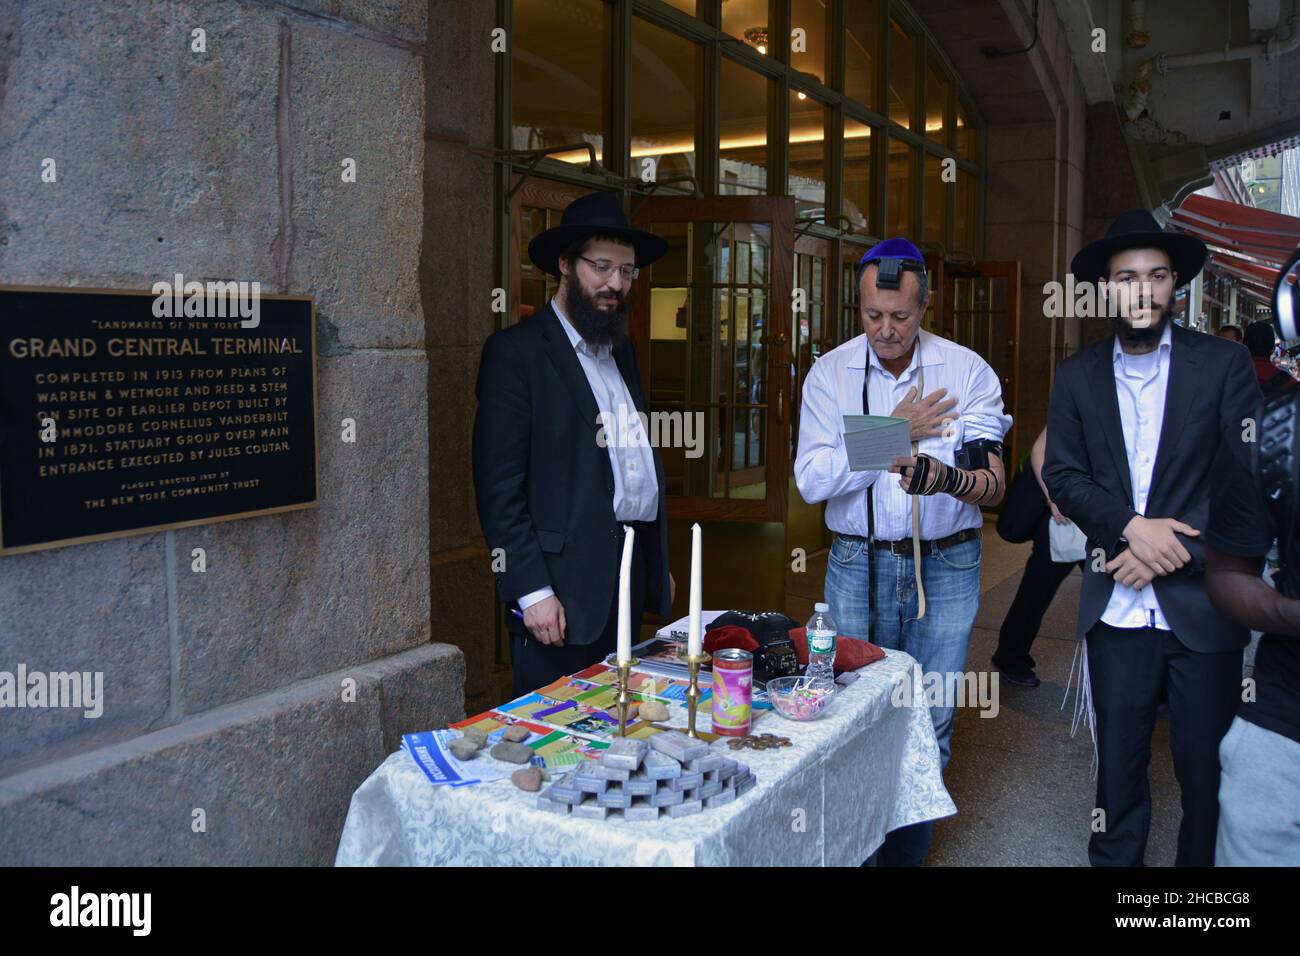 Chabad orthodox Jewish boys reaching out and urging fellow Jews to pray wearing tefillin. At Grand Central Station in Manhattan, N Stock Photo